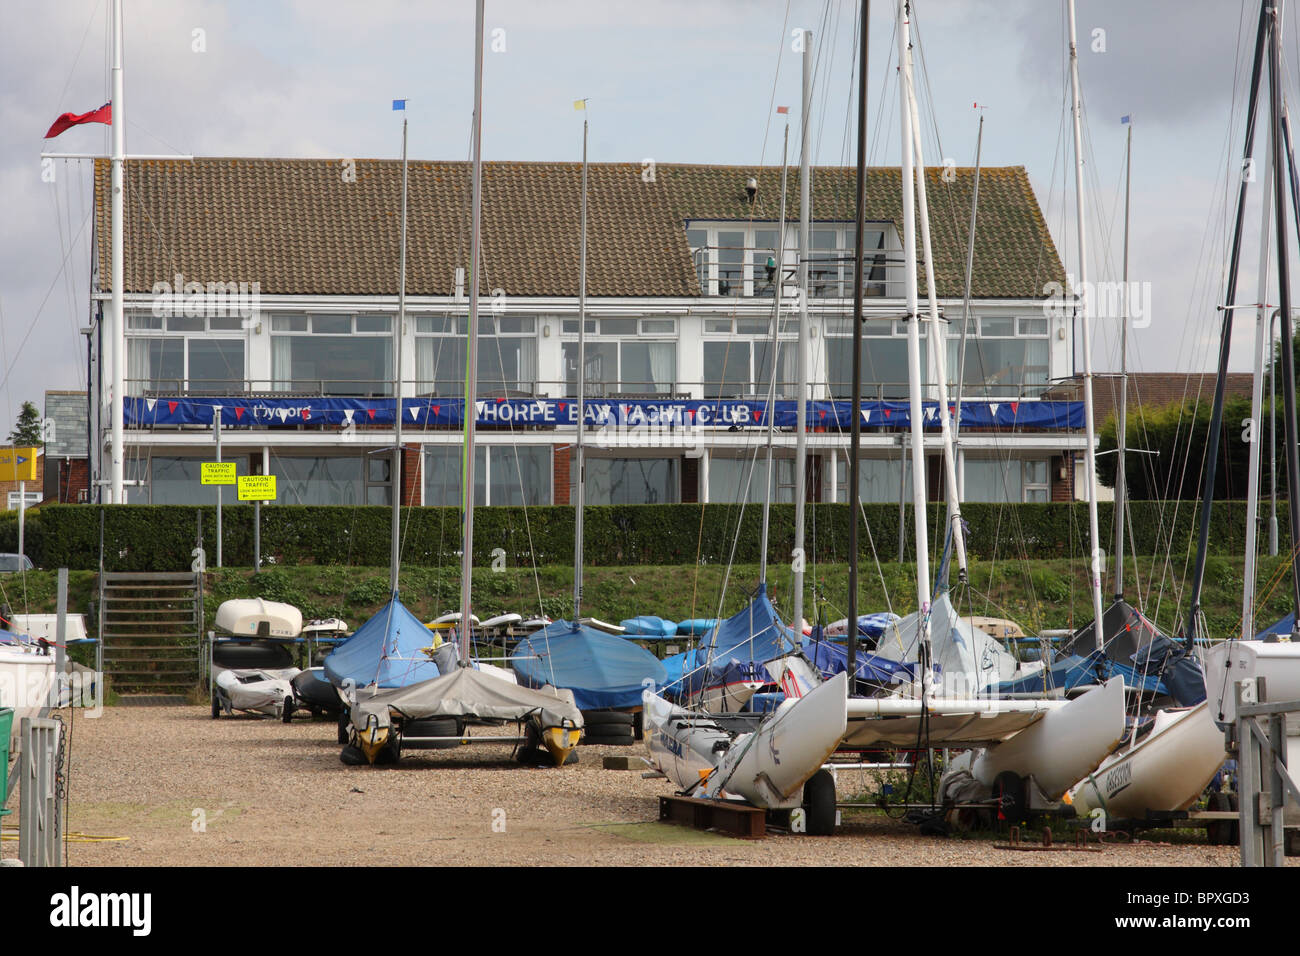 Thorpe Bay Yacht Club, Southend-on-Sea, Essex, Angleterre, Royaume-Uni Banque D'Images